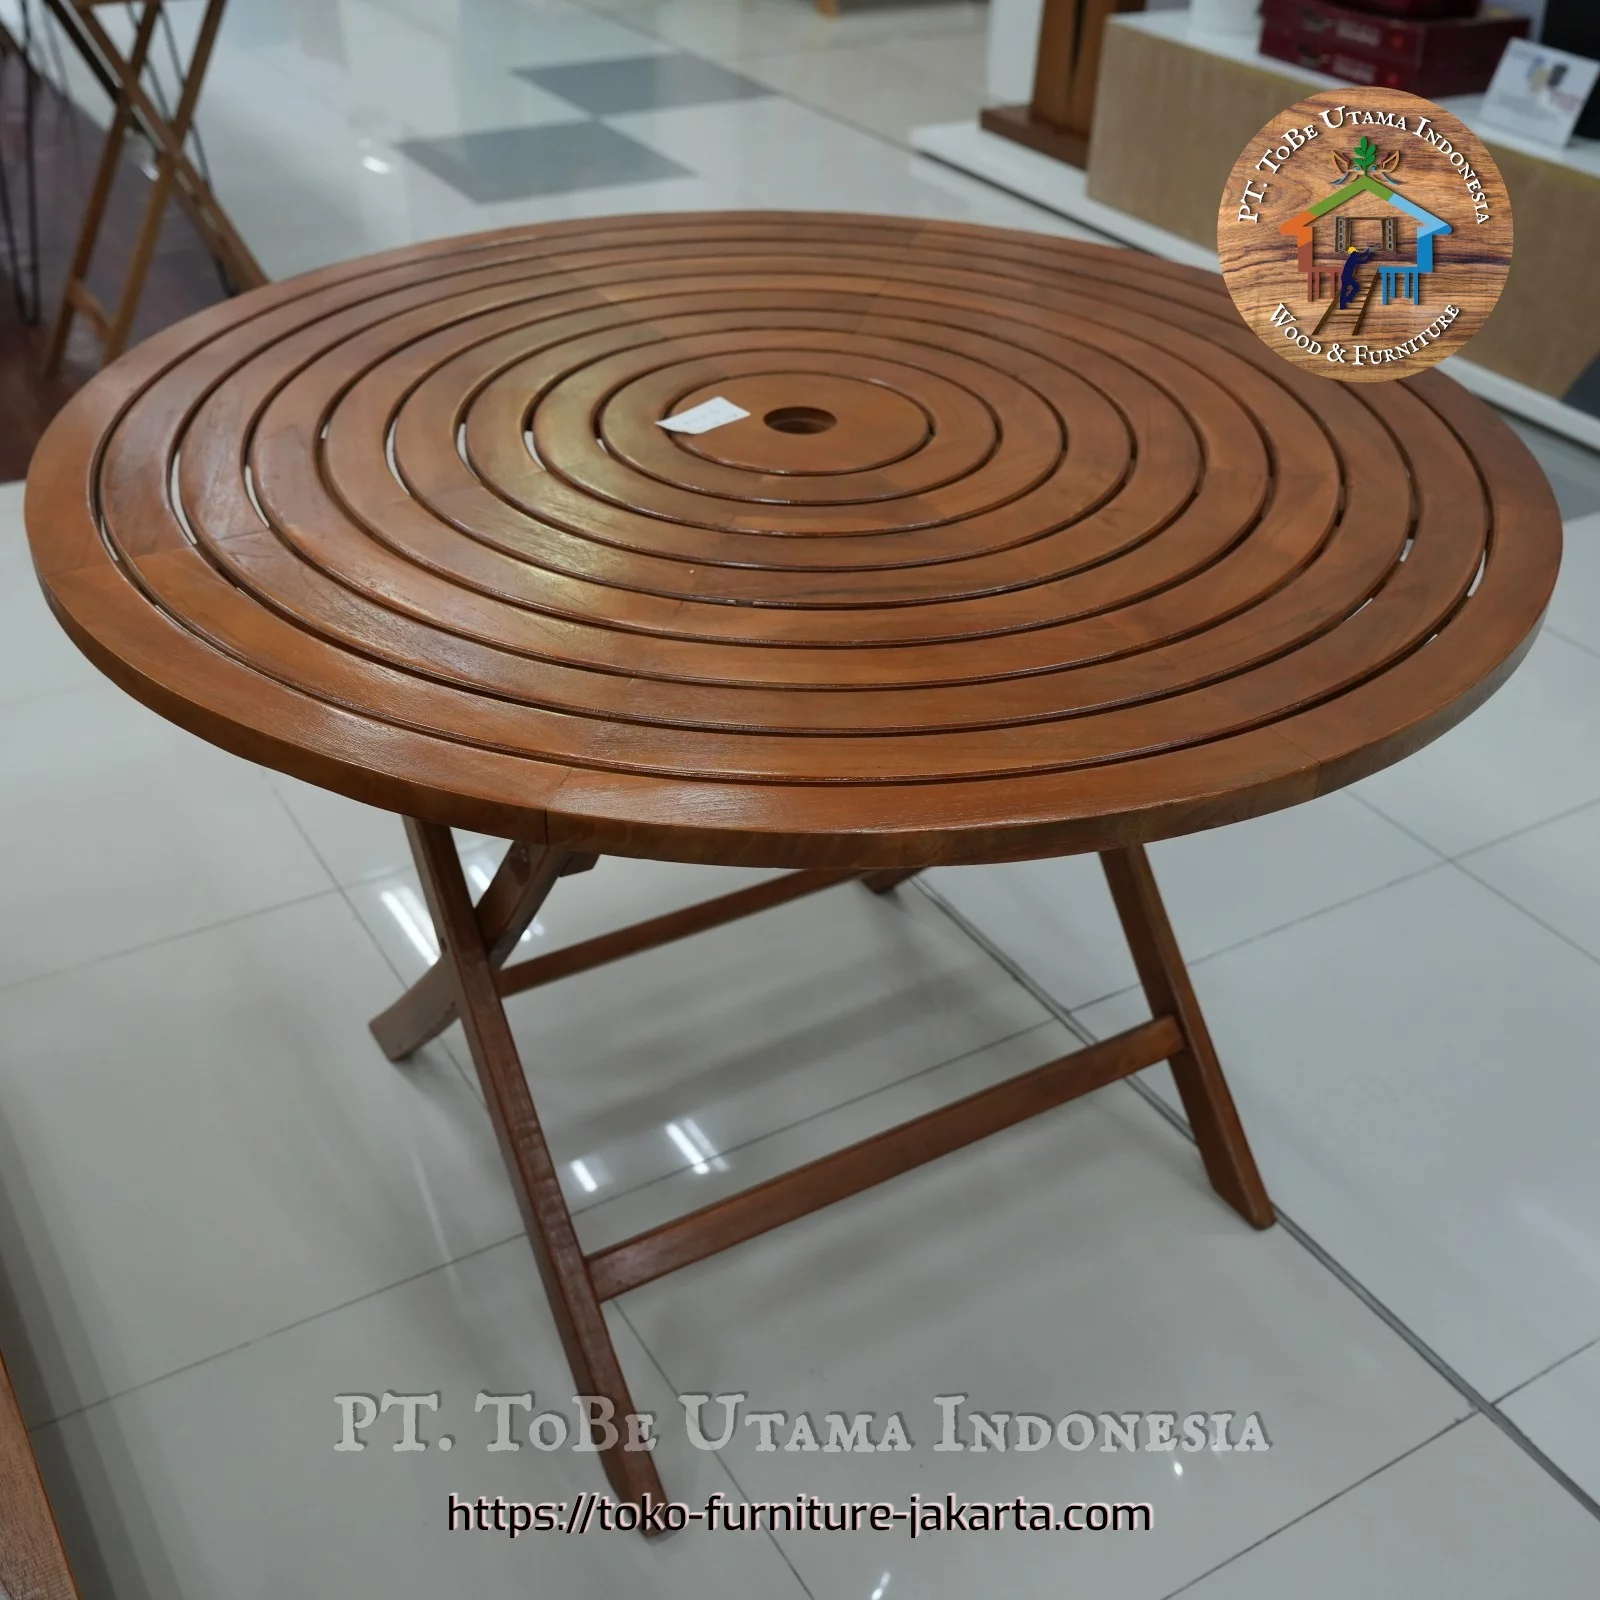 Terrace Tables: Teak Wood Round Table Garden Spiral made of teakwood (image 1 of 8).